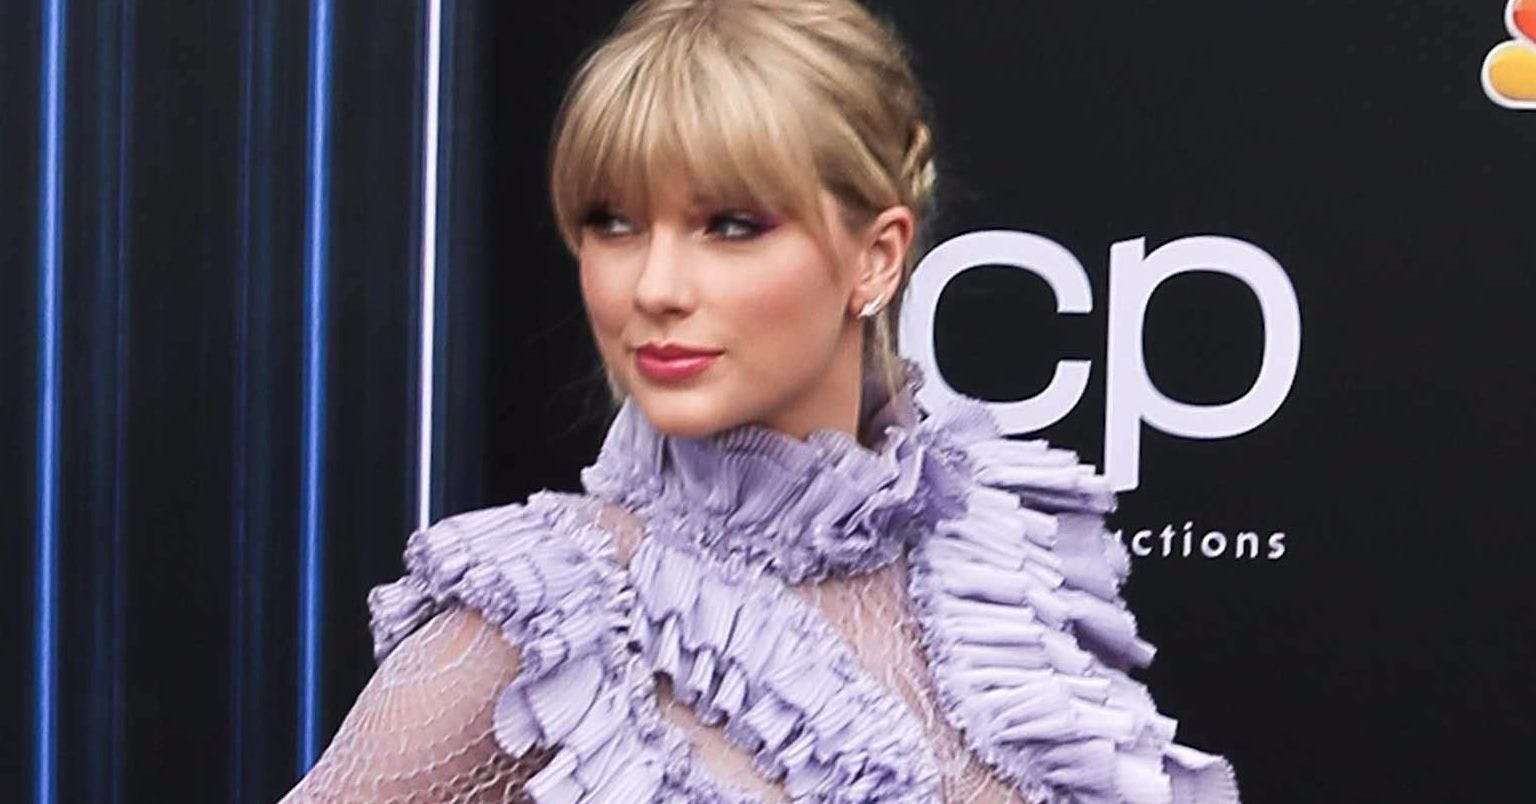 image for Taylor Swift Trashes Scooter Braun After He Buys Record Label: He 'Stripped Me of My Life’s Work'